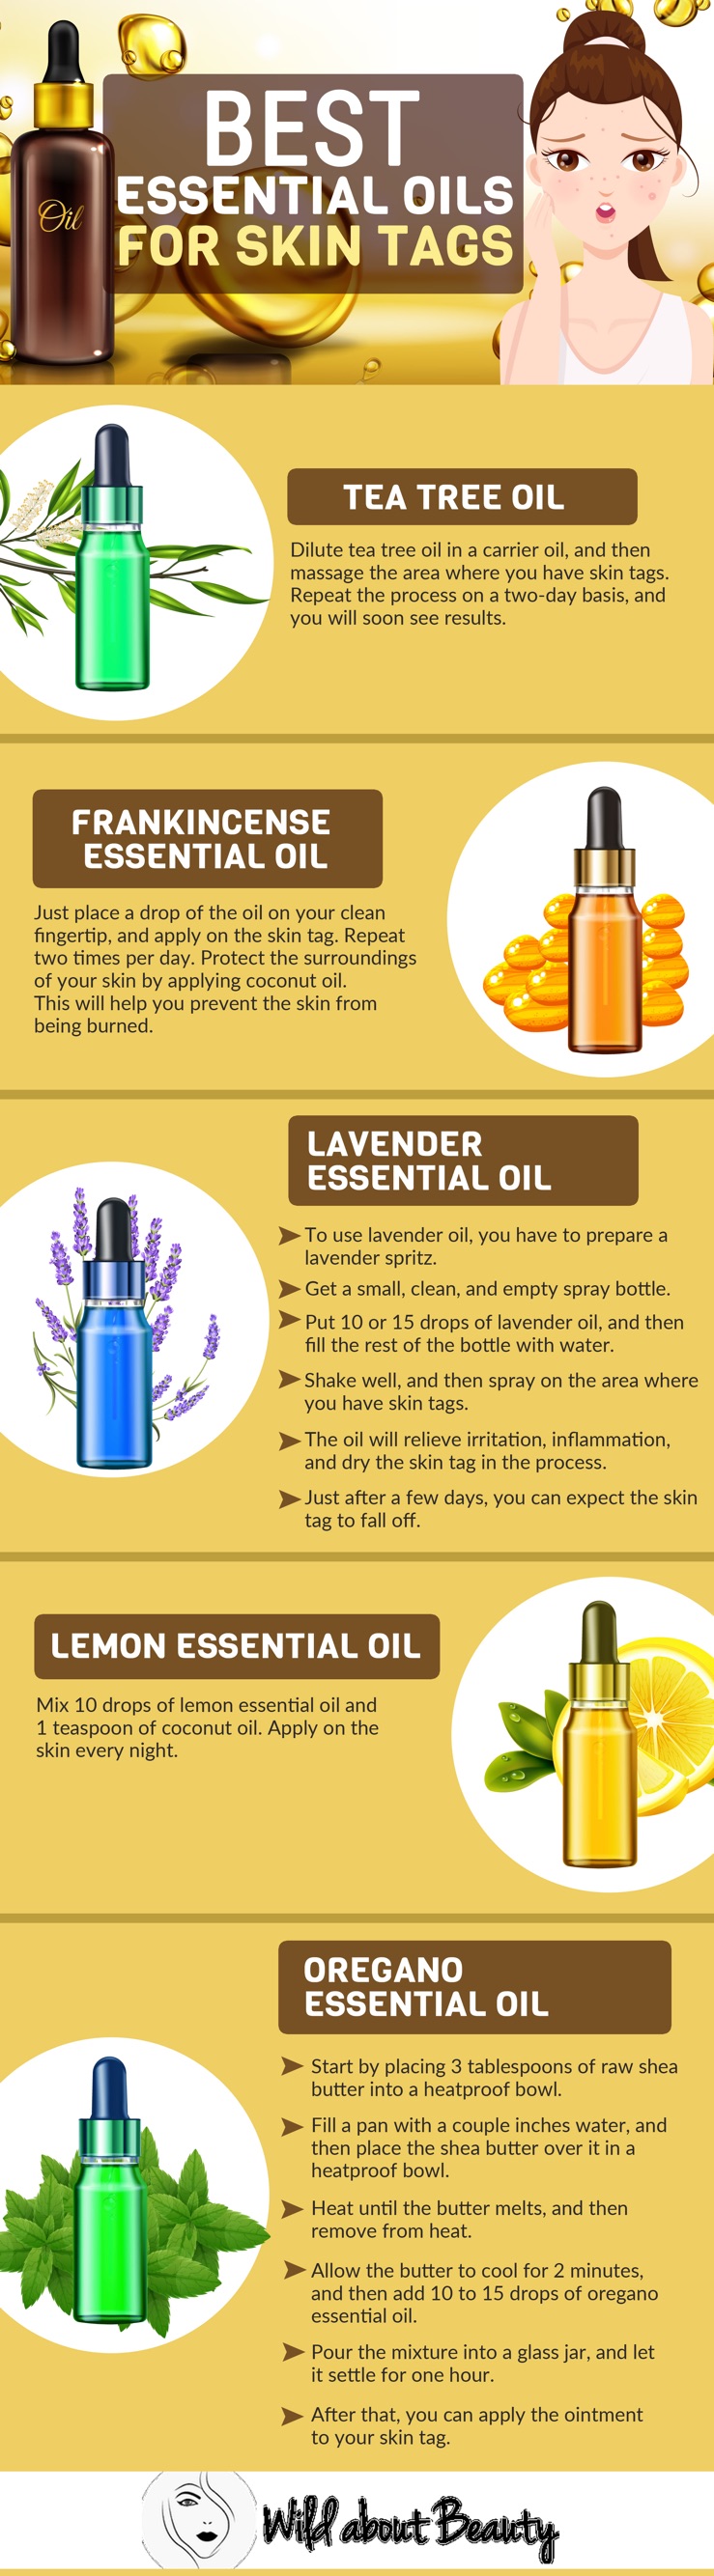 Best essential oils for skin tags